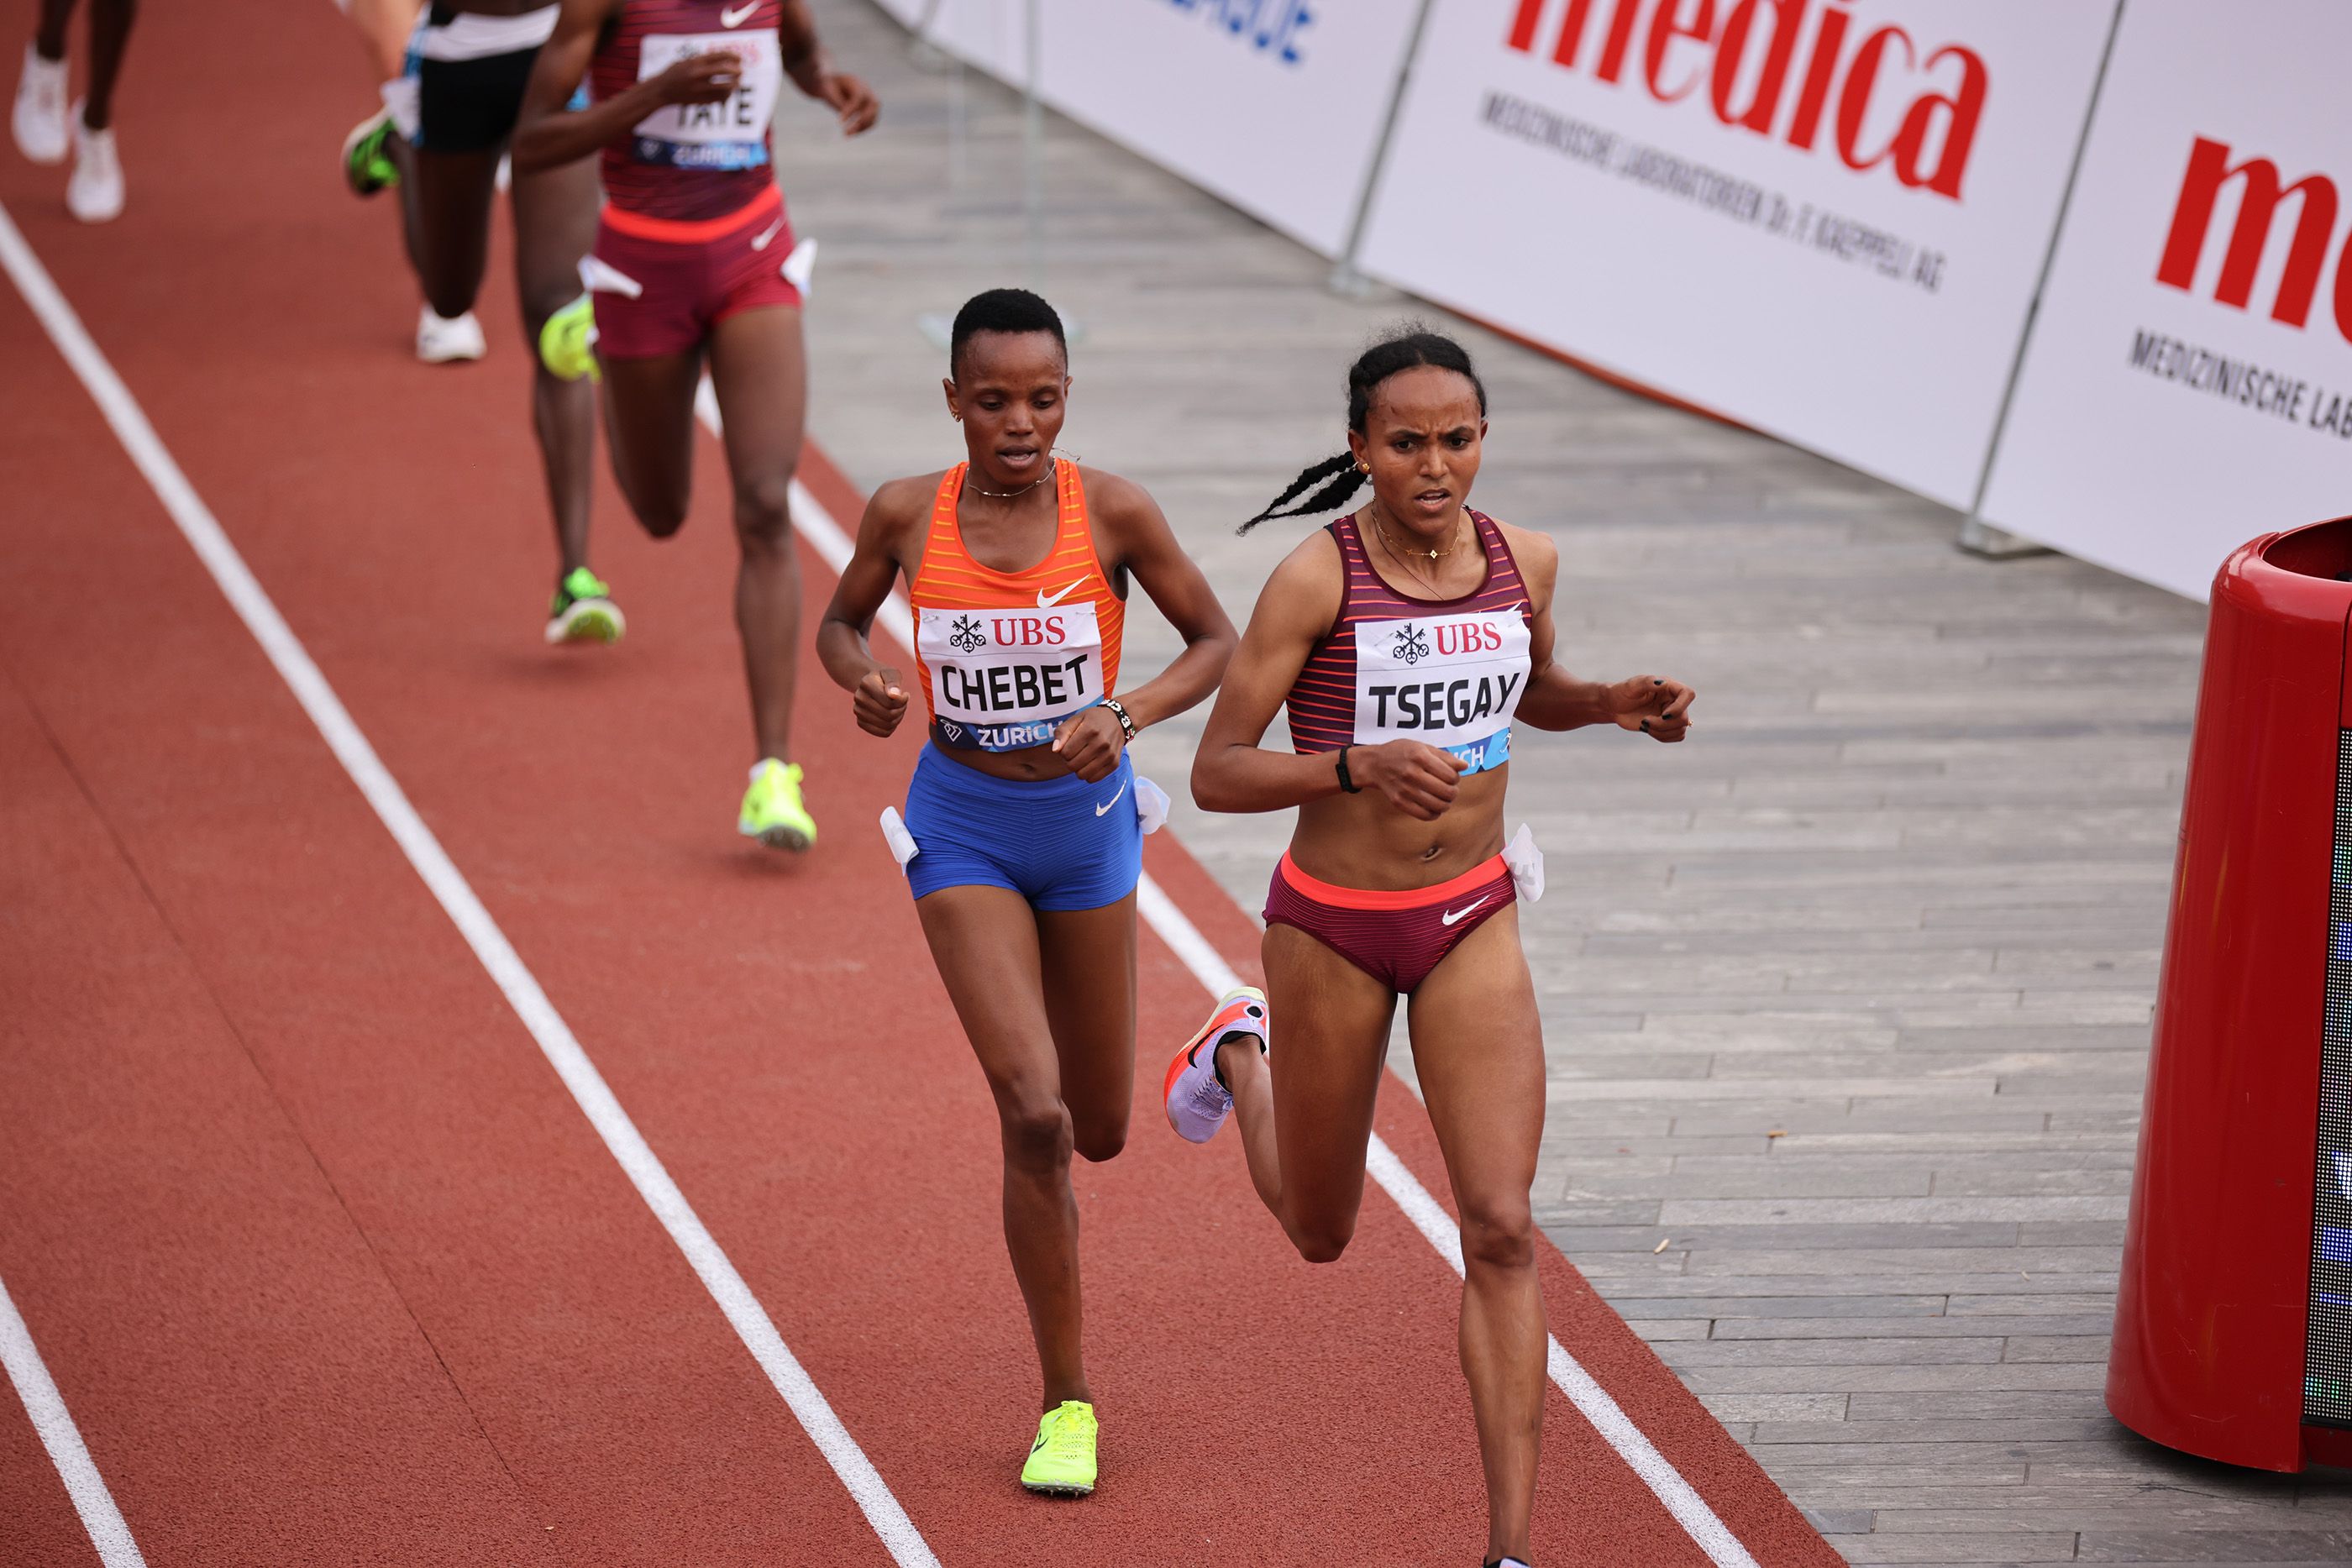 Beatrice Chebet and Gudaf Tsegay race in Zurich